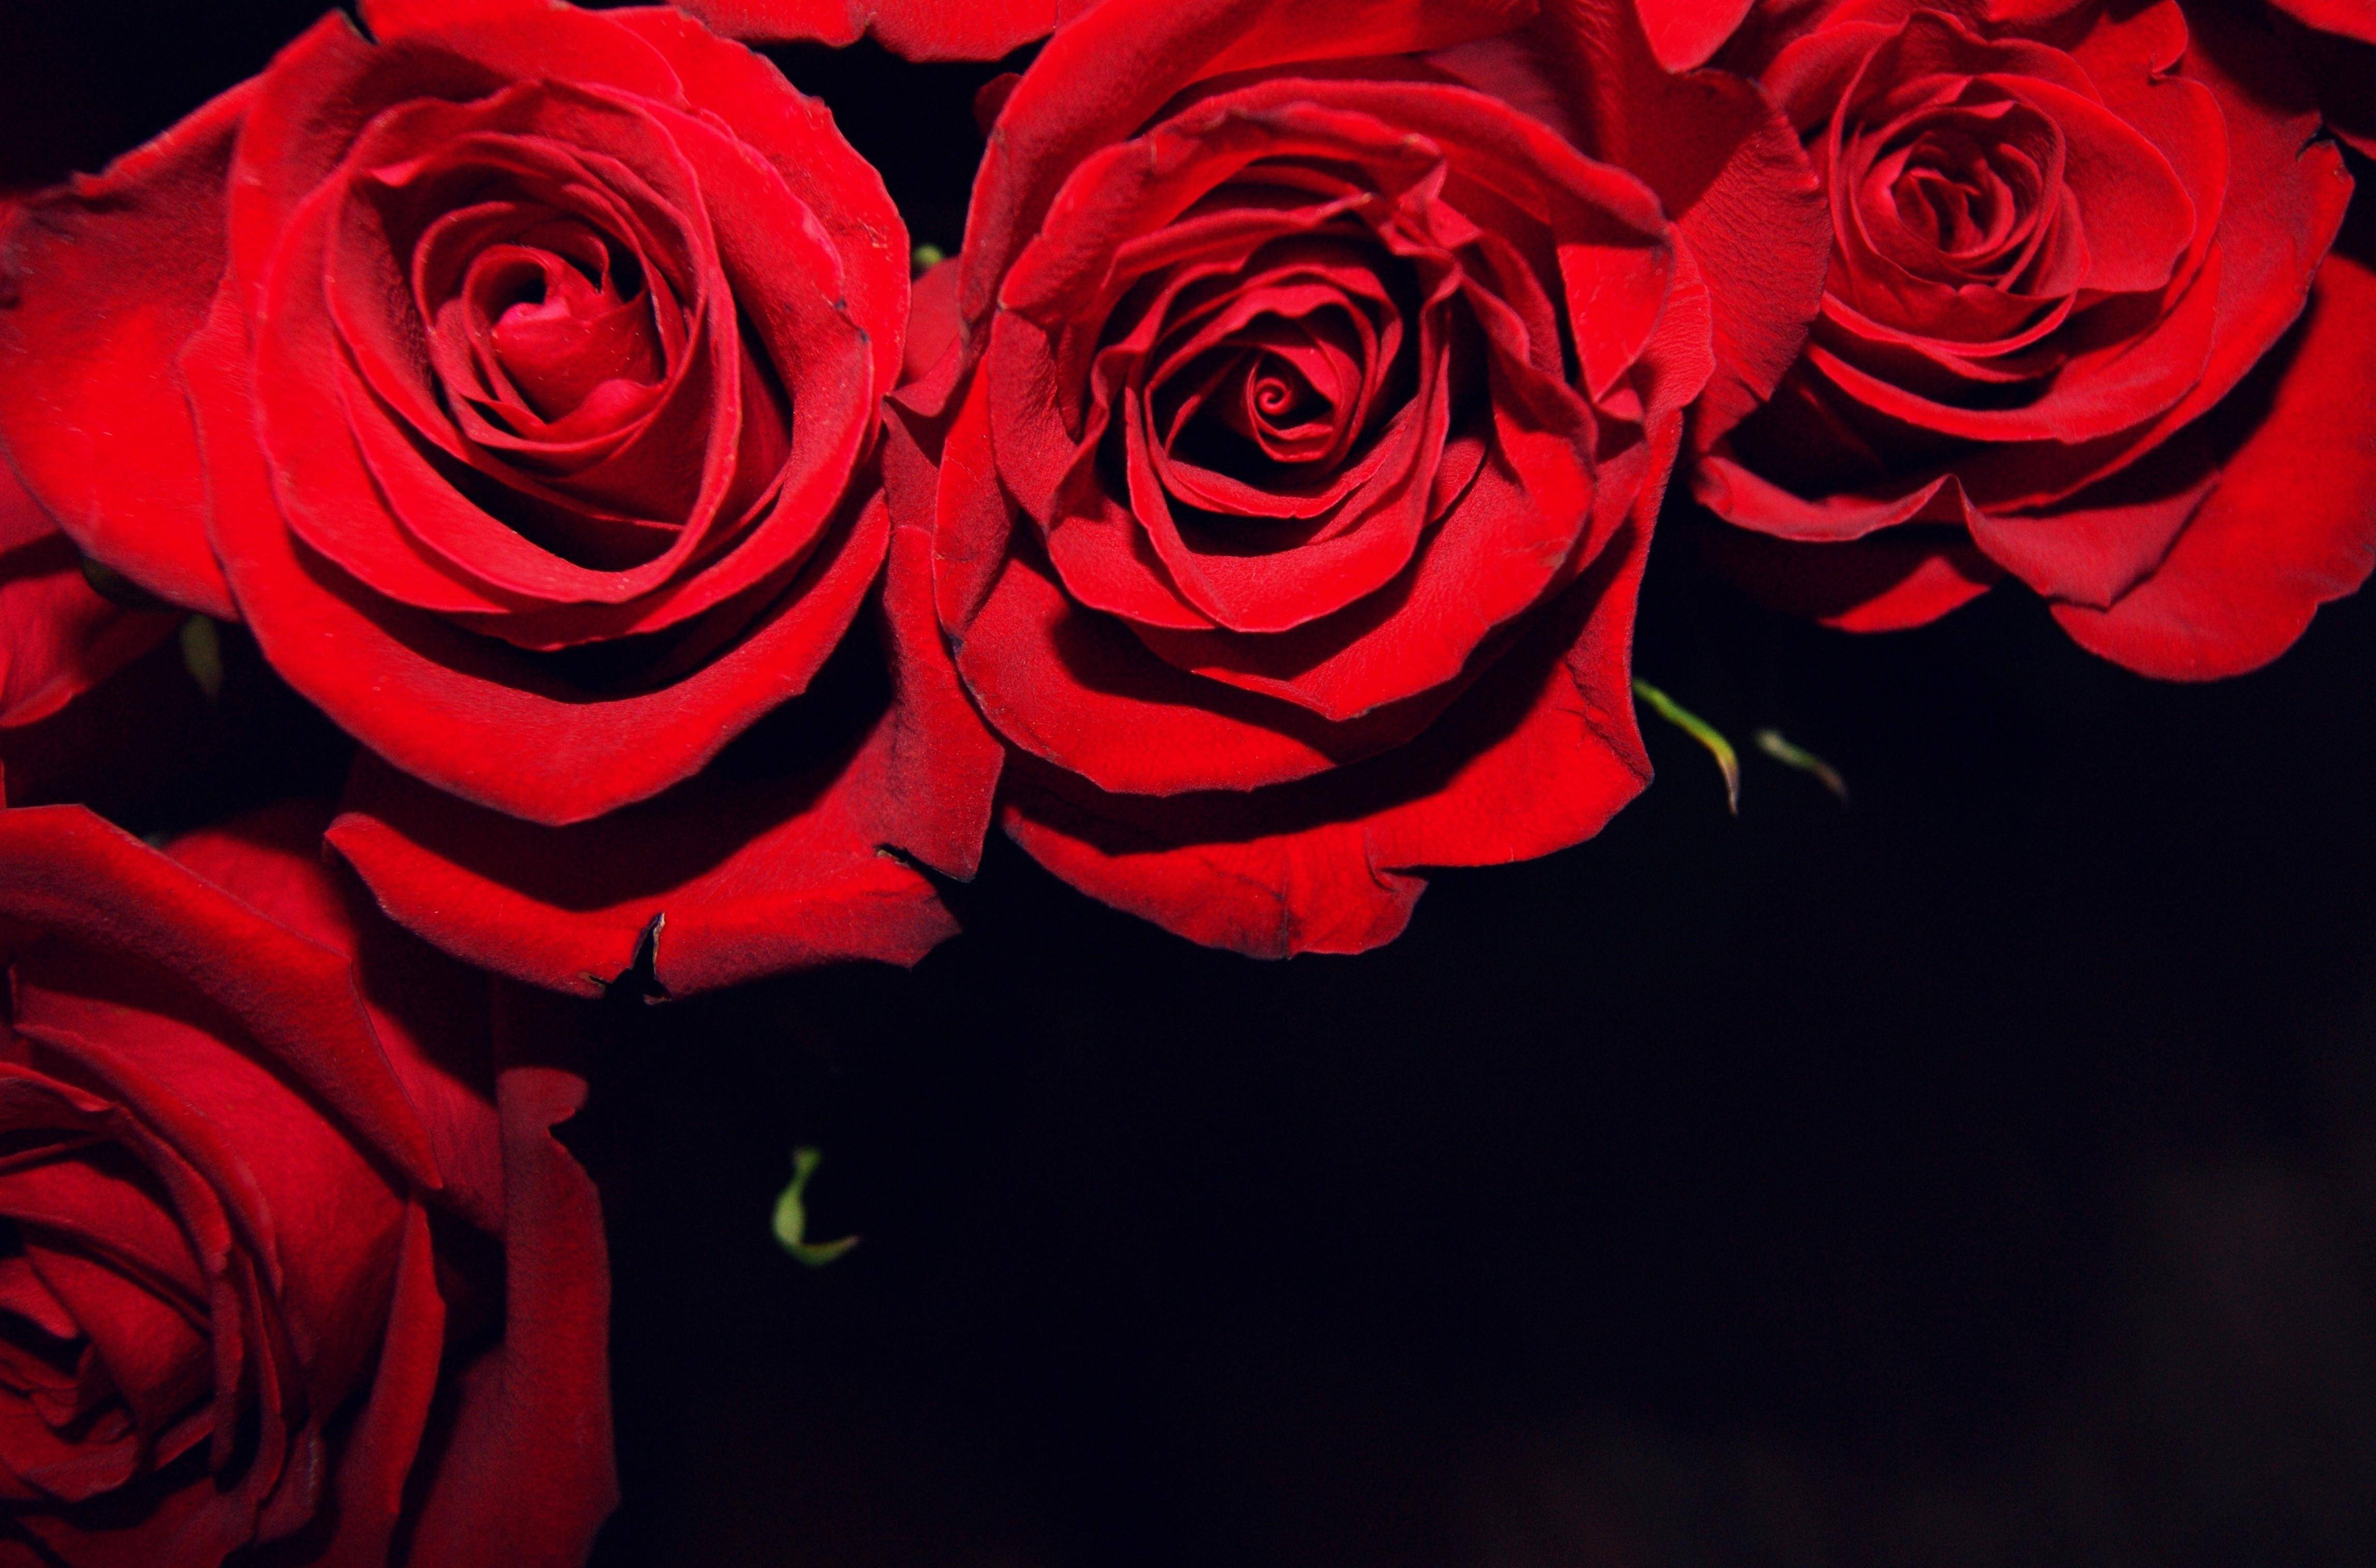 Red Roses Black Backgrounds - Wallpaper Cave